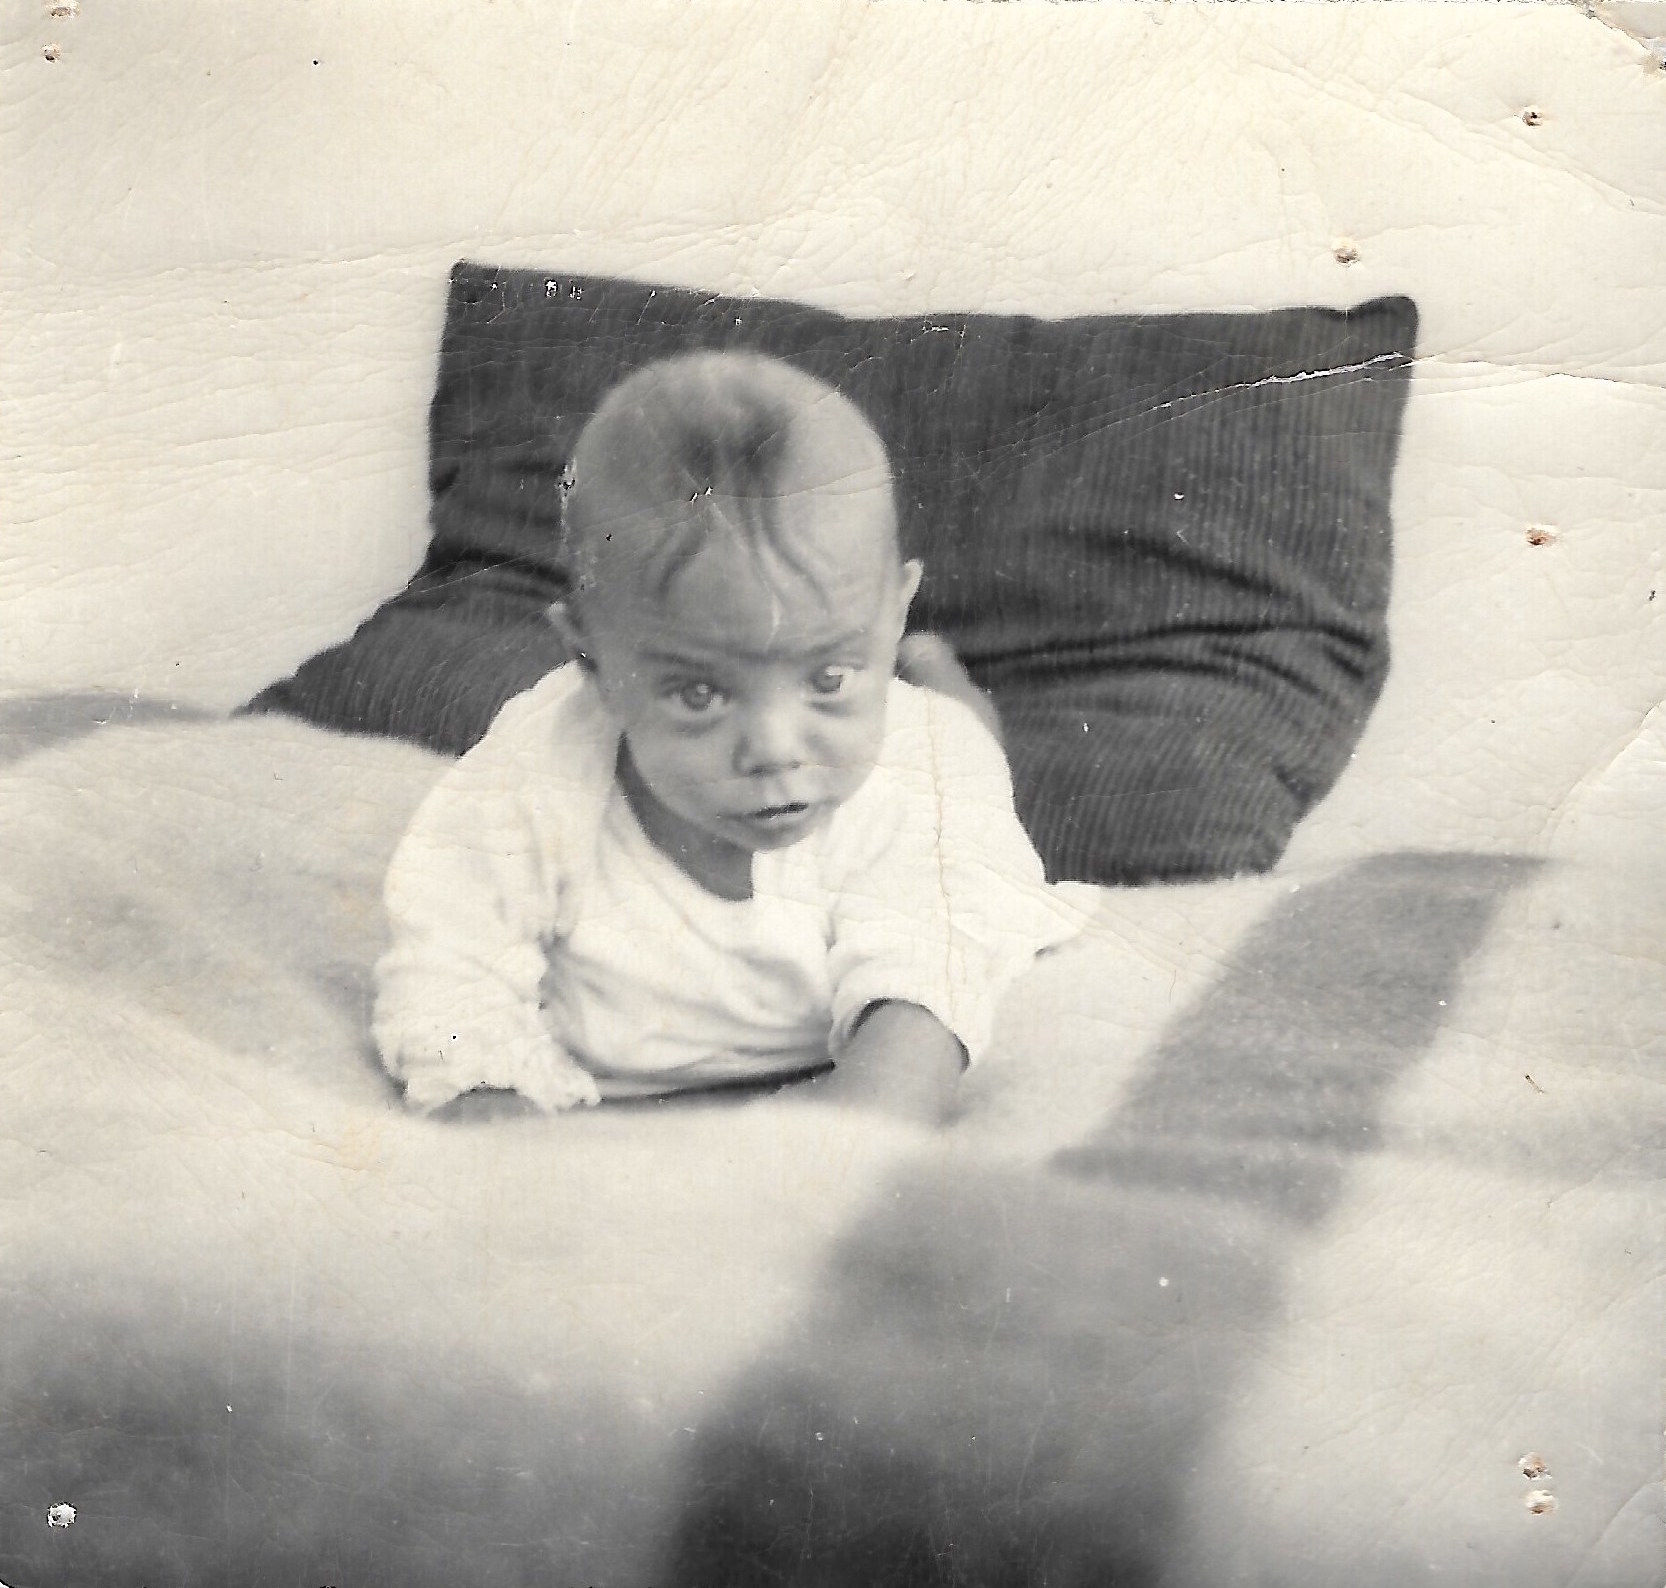 Rags as a baby in San Francisco, CA, 1948.